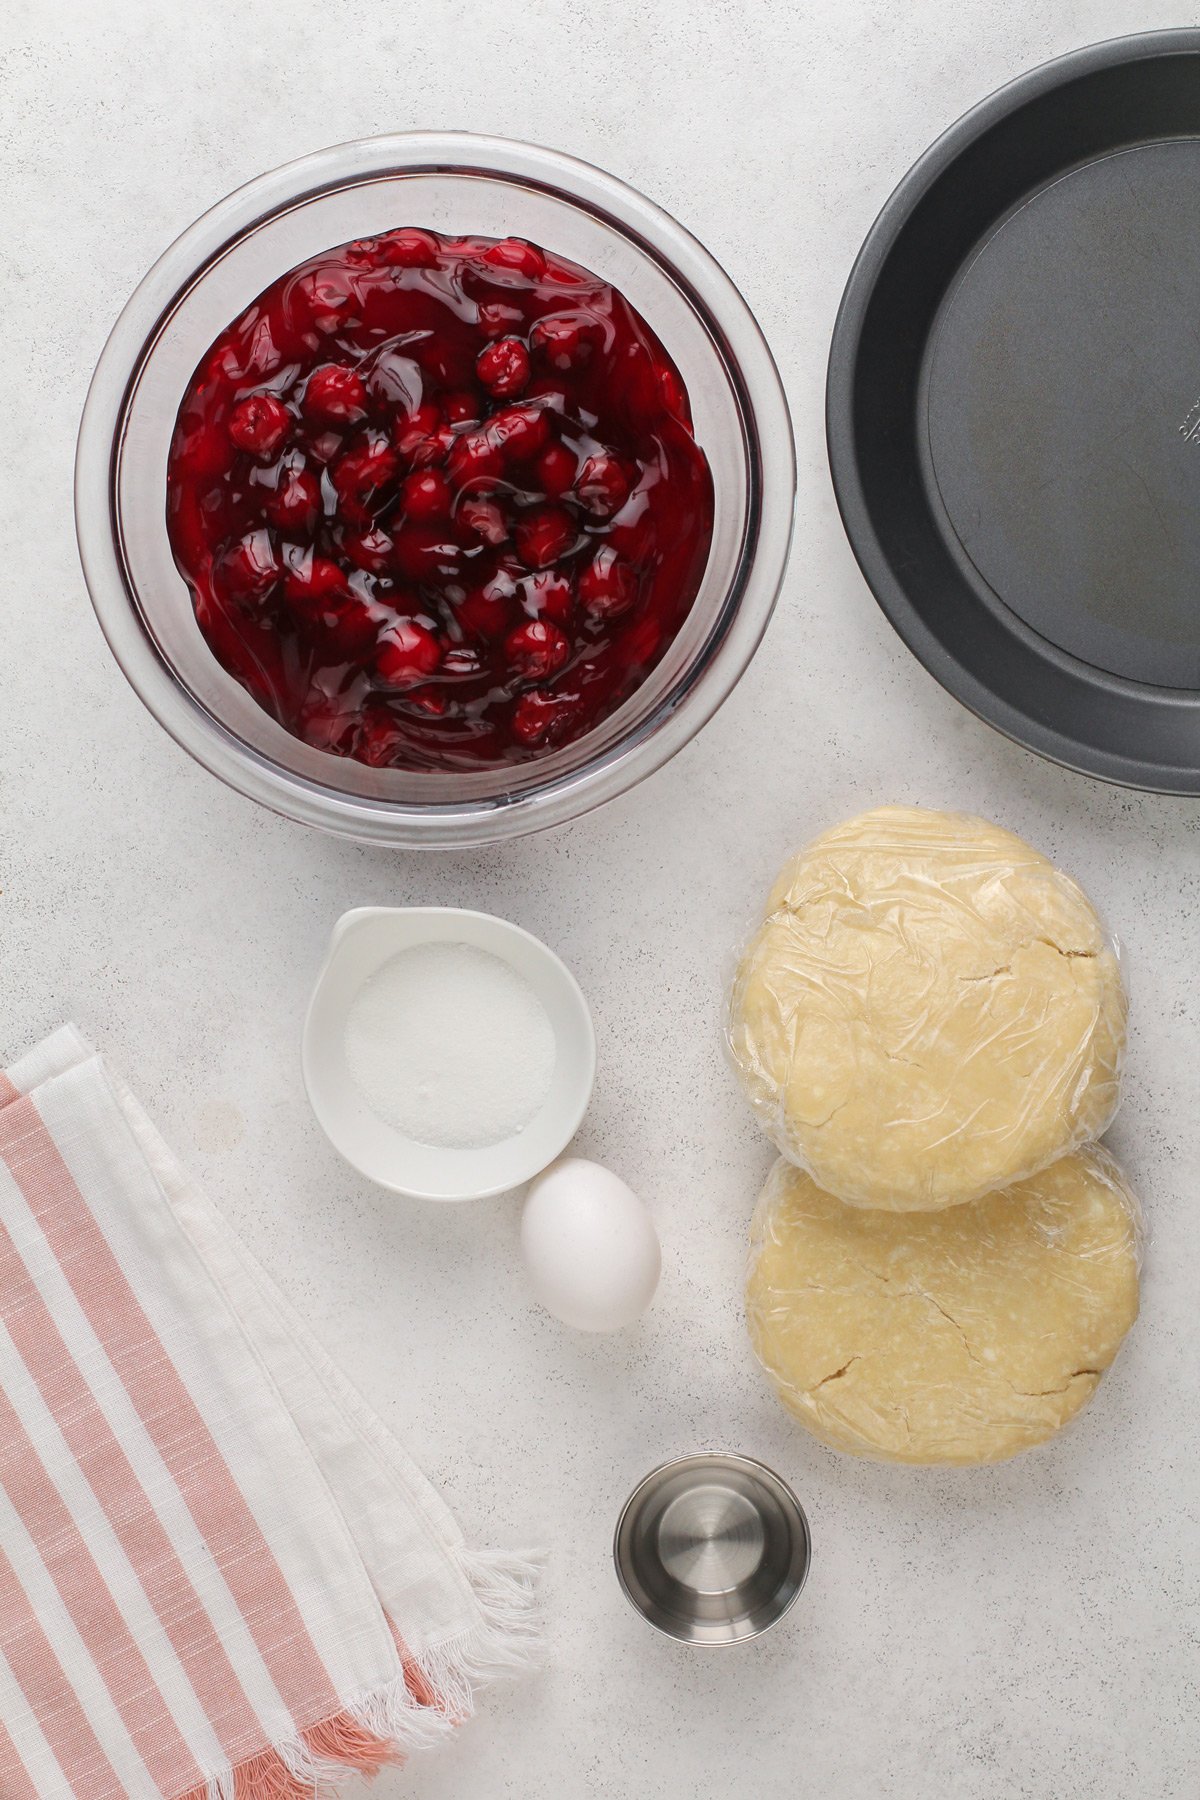 Homemade cherry pie ingredients arranged on a light countertop.